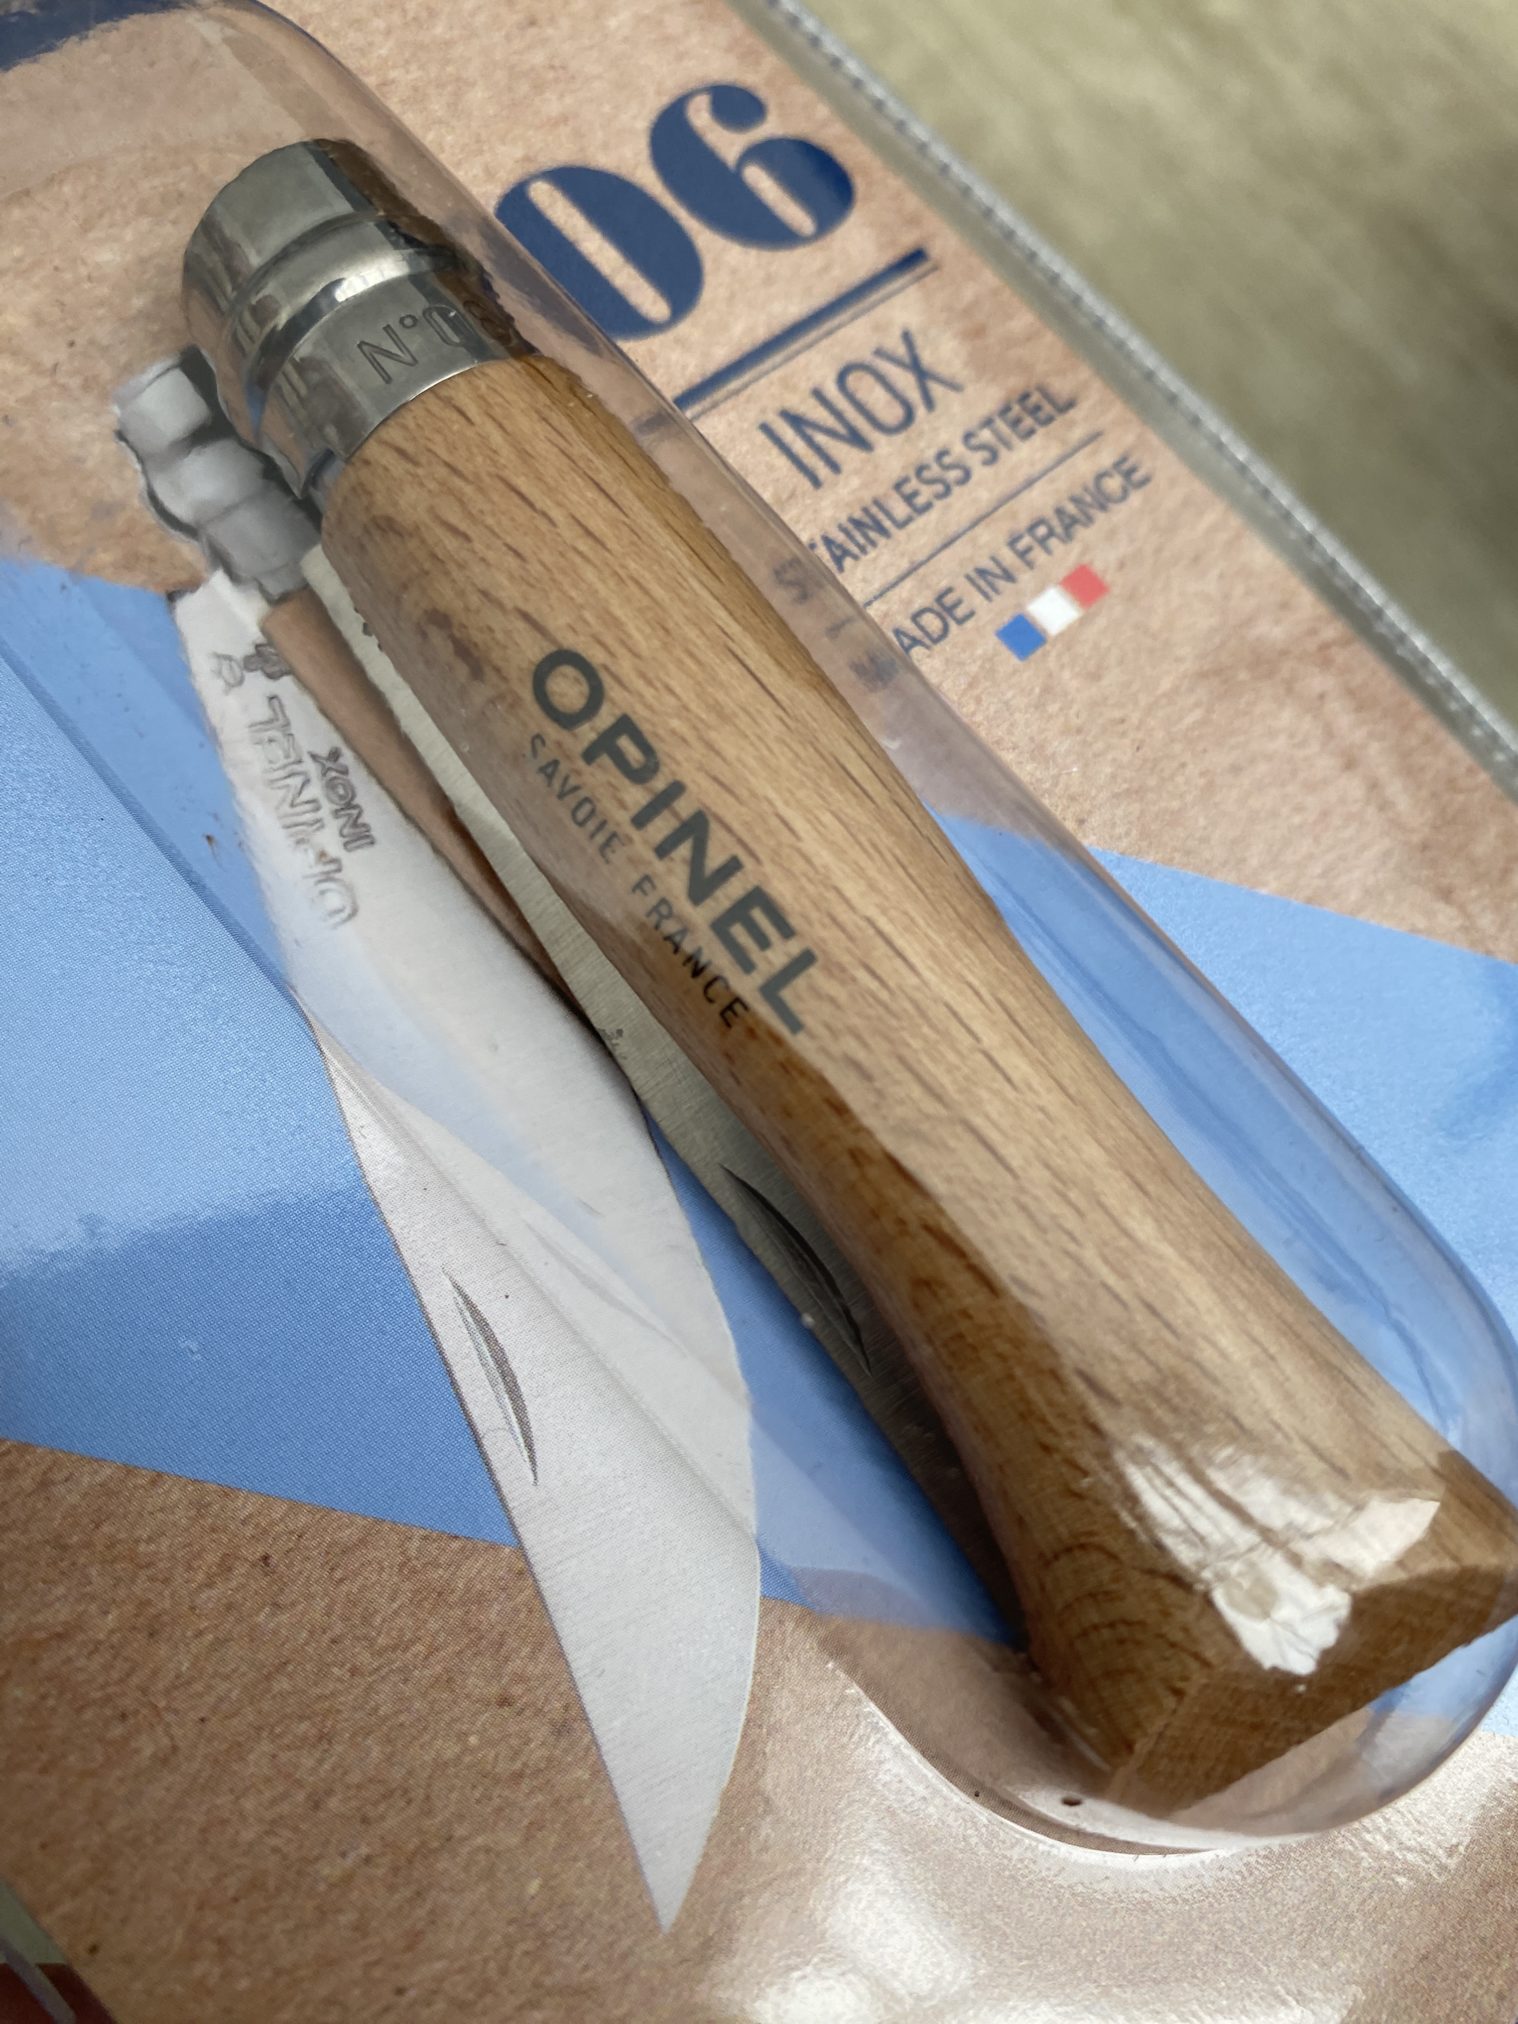 Opinel Folding Knife - The Nomadik Quarterly Subscription Review